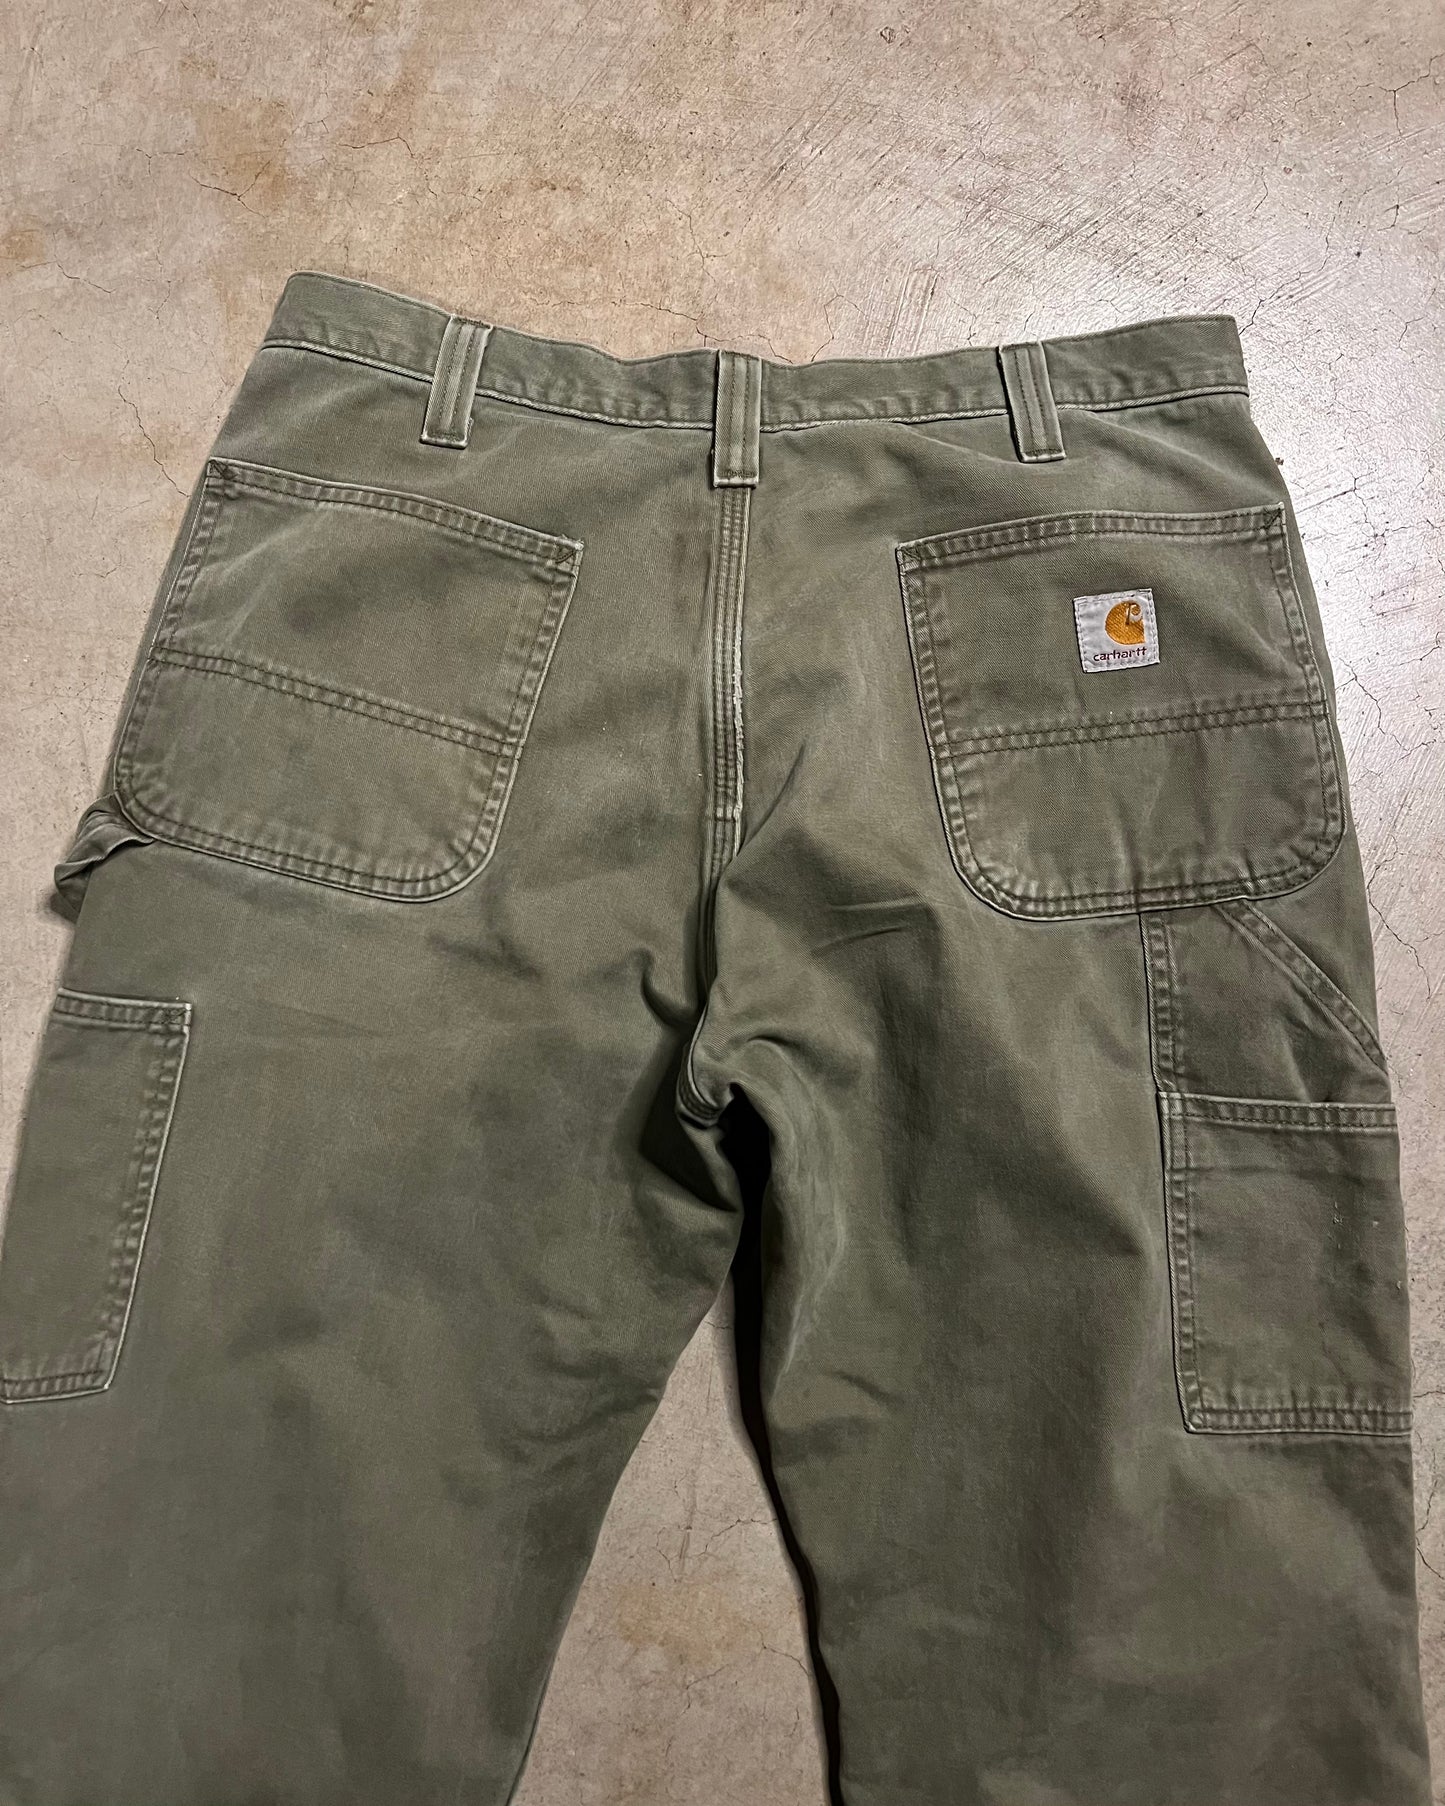 Vintage Distressed Carhartt Forrest Green Insulated Pants